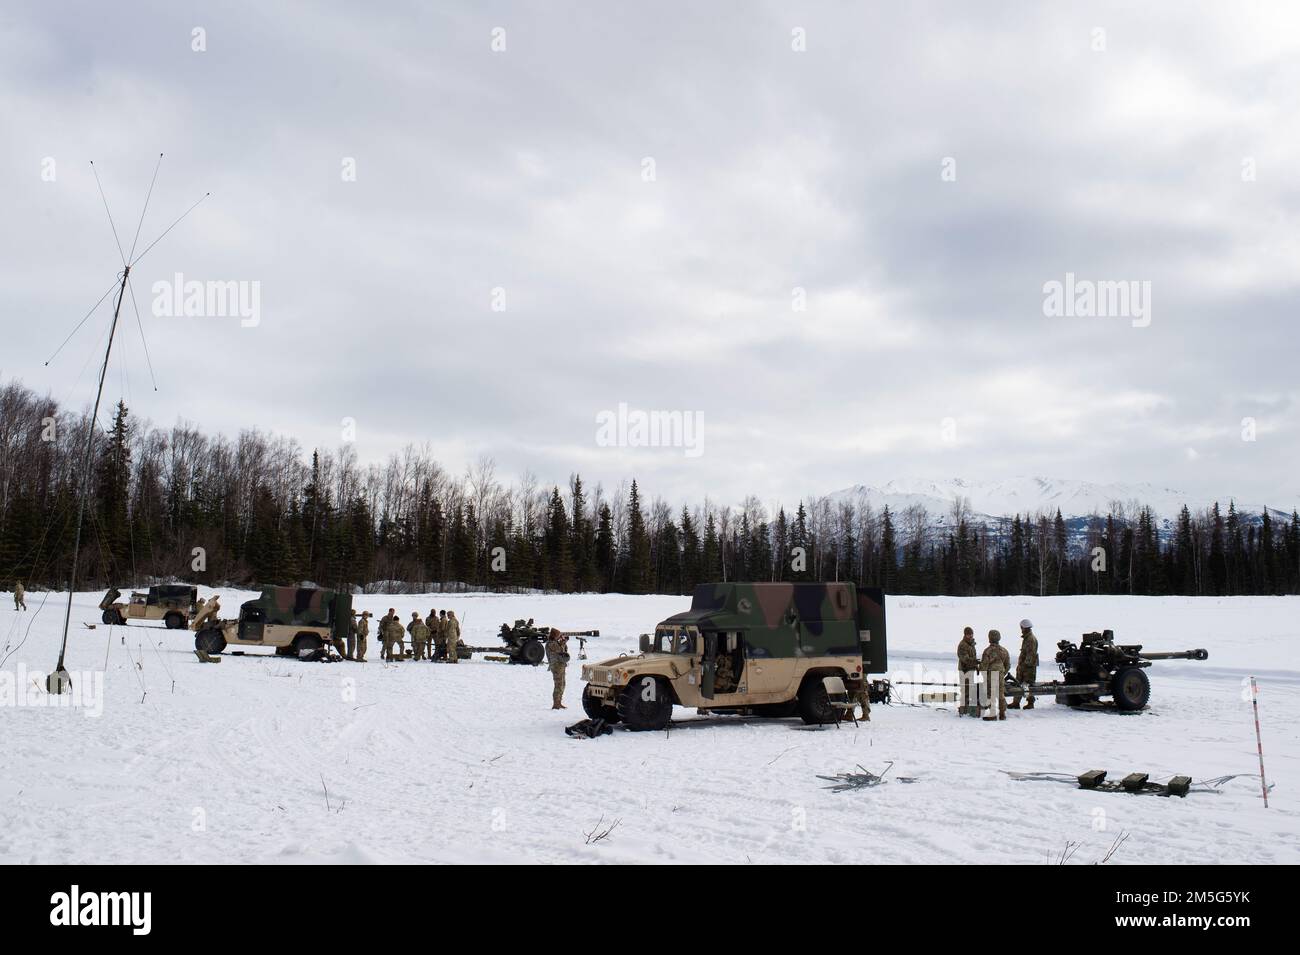 U.S. Army paratroopers assigned to Bravo Battery, 2nd Battalion, 377th Parachute Field Artillery Regiment, 4th Infantry Brigade Combat Team (Airborne), 25th Infantry Division, U.S. Army Alaska, stage for live-fire artillery training at Joint Base Elmendorf-Richardson, Alaska, March 16, 2022. The Soldiers of 4/25 belong to the only American airborne brigade in the Pacific and are trained to execute airborne maneuvers in extreme cold weather and high altitude environments in support of combat, partnership and disaster relief operations. Stock Photo